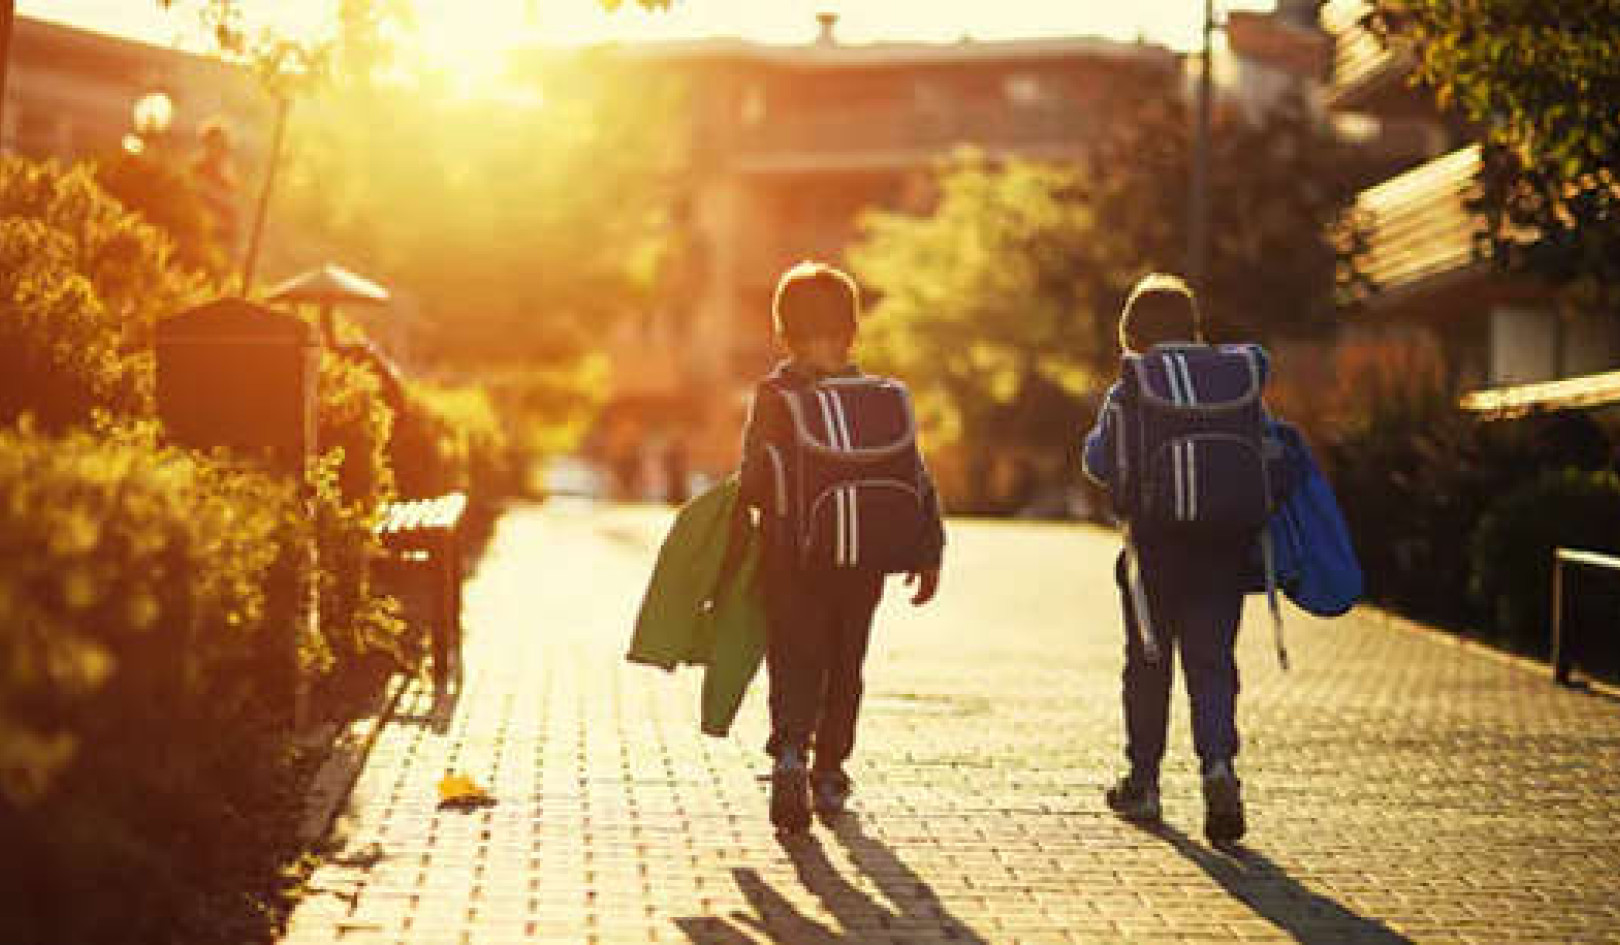 Do kids free to roam on their own feel more confident in adulthood?